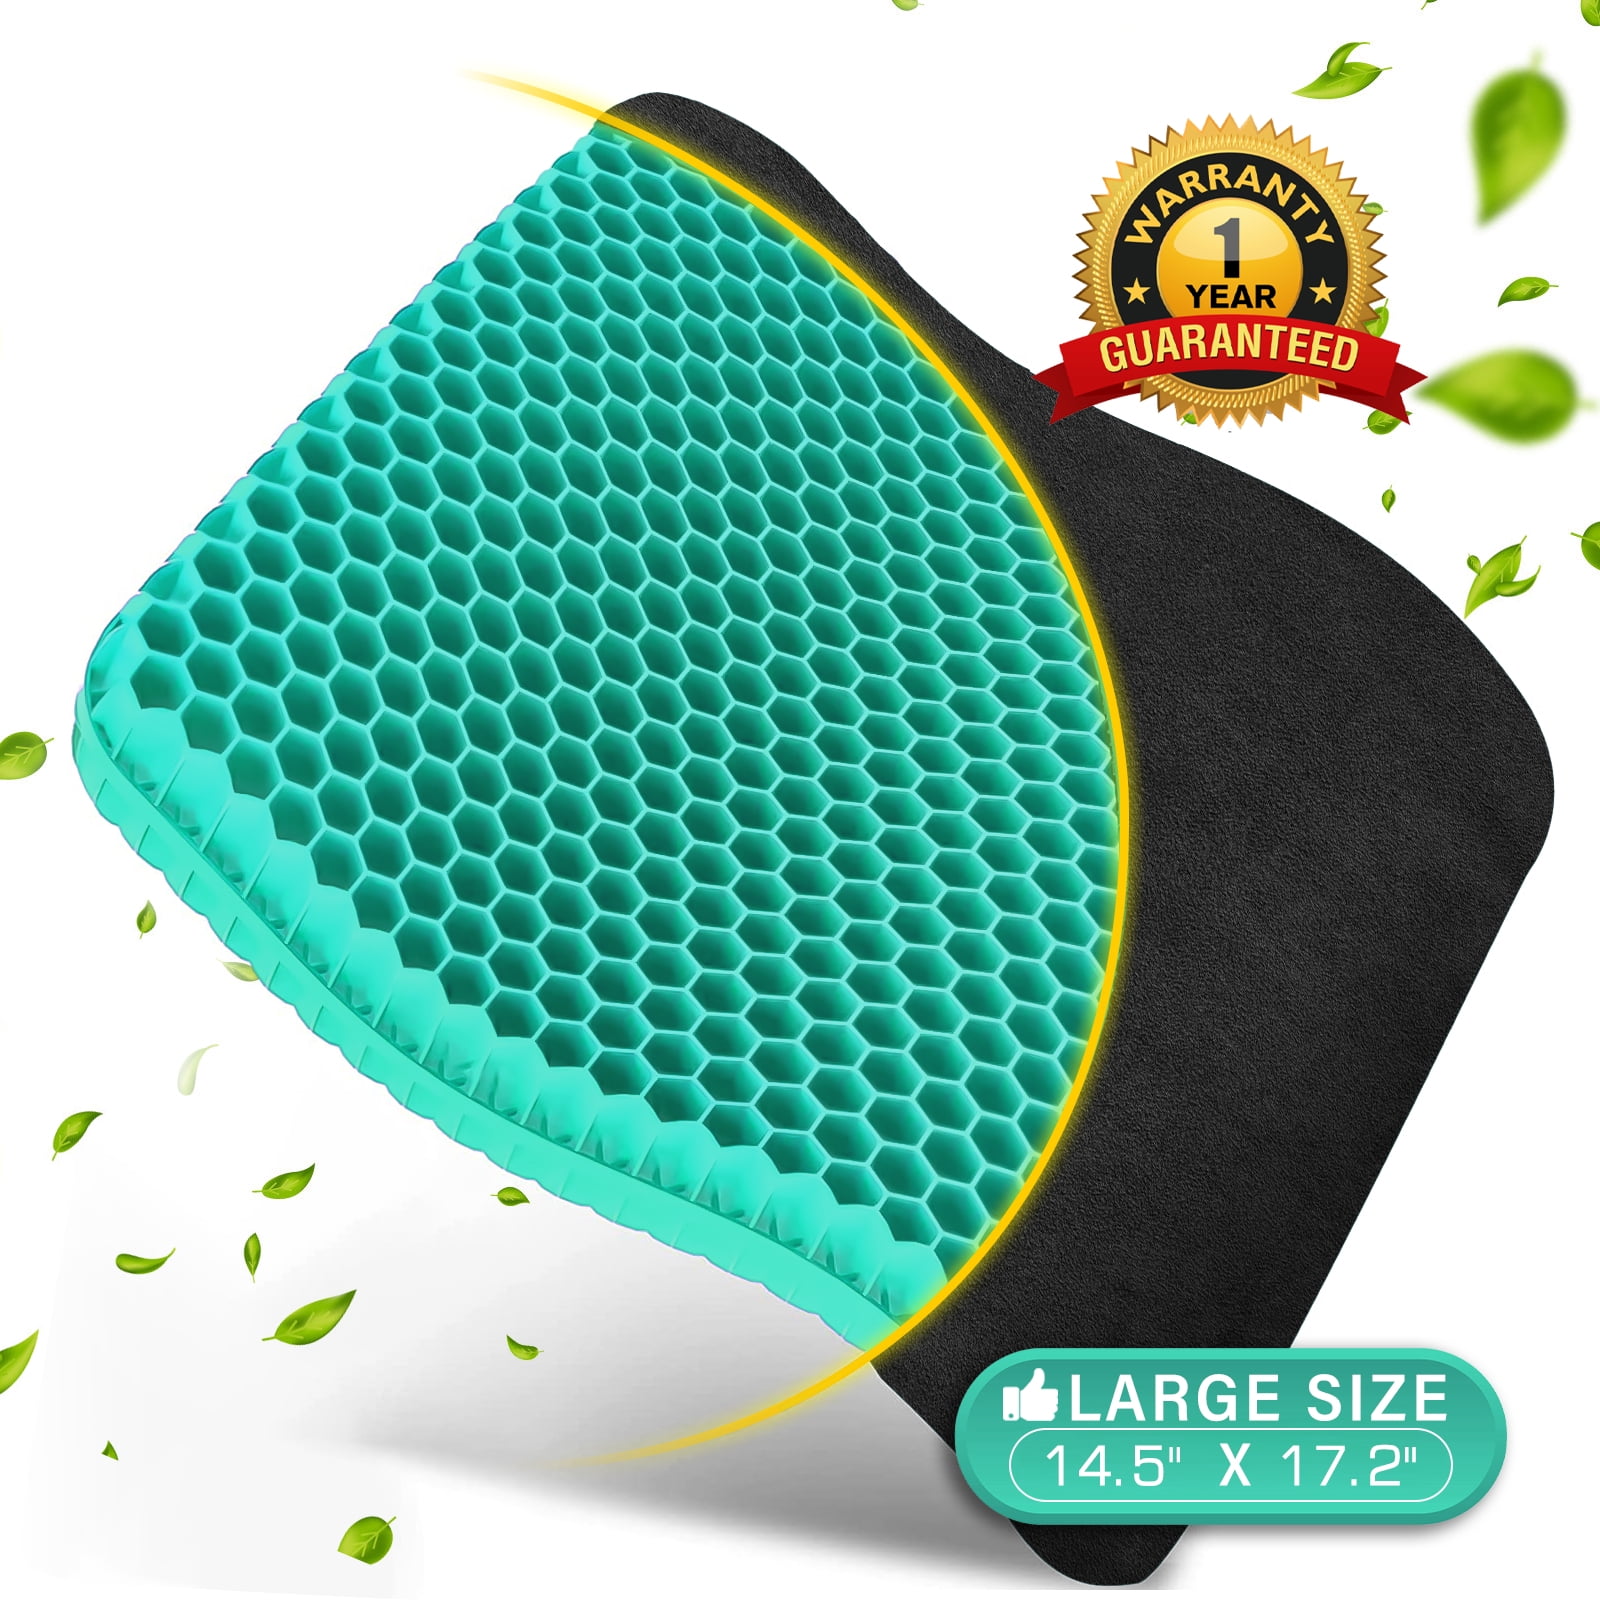 Gel Seat Cushion Pillow for Long Sitting – Office Chair Car Egg Seat  Cushion with Non-Slip Cover for Back, Coccyx & Tailbone Pain Relief Pad 